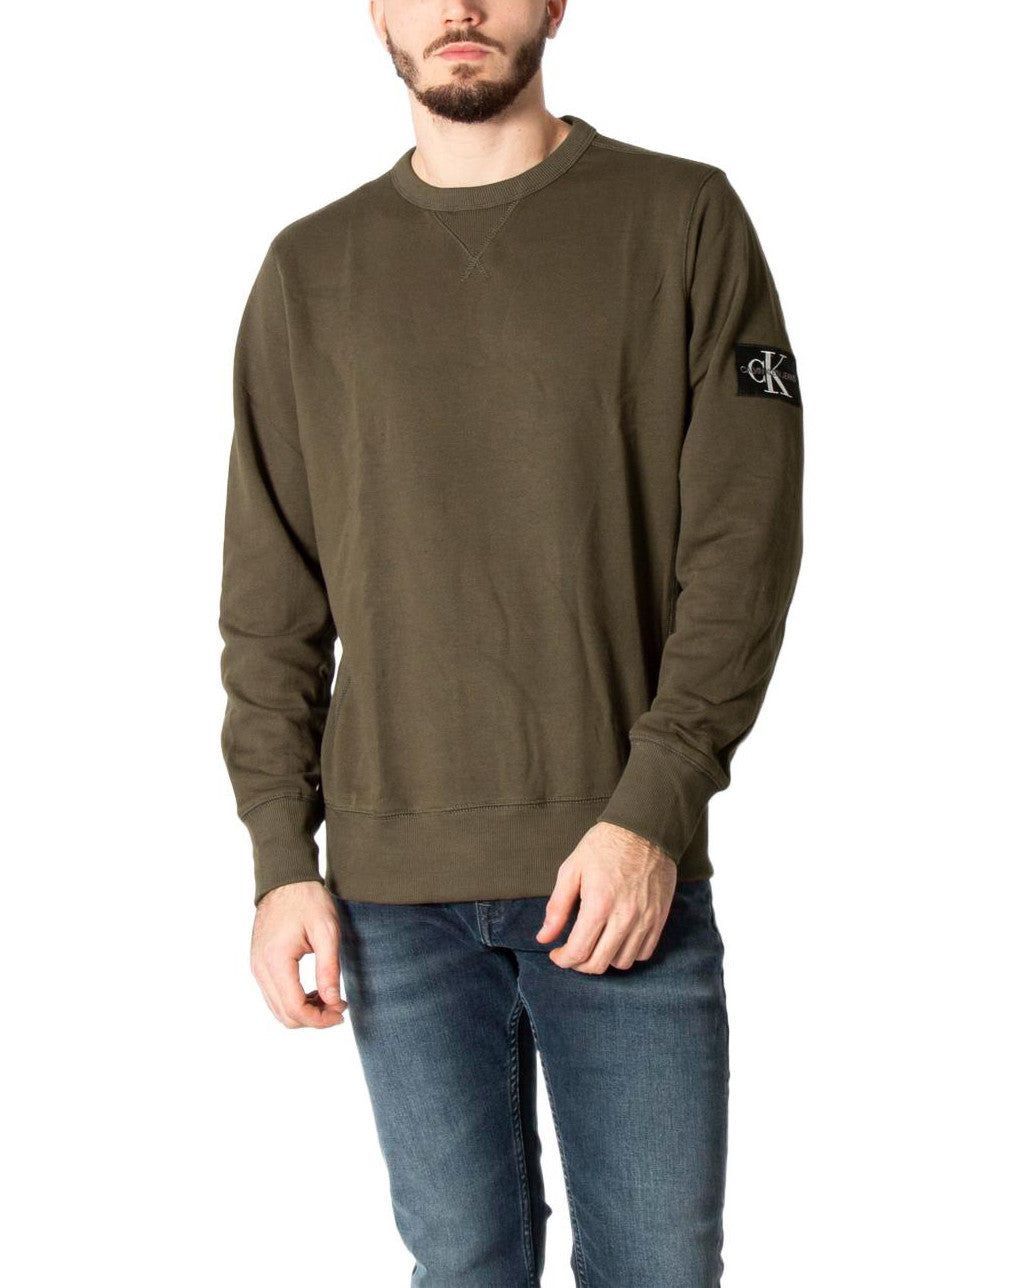 Brand: Calvin Klein Jeans Gender: Men Type: Sweatshirts Season: Fall/Winter  PRODUCT DETAIL • Color: green • Pattern: plain • Fastening: slip on • Sleeves: long • Neckline: round neck  COMPOSITION AND MATERIAL • Composition: -100% cotton  •  Washing: machine wash at 30° -100% Cotton